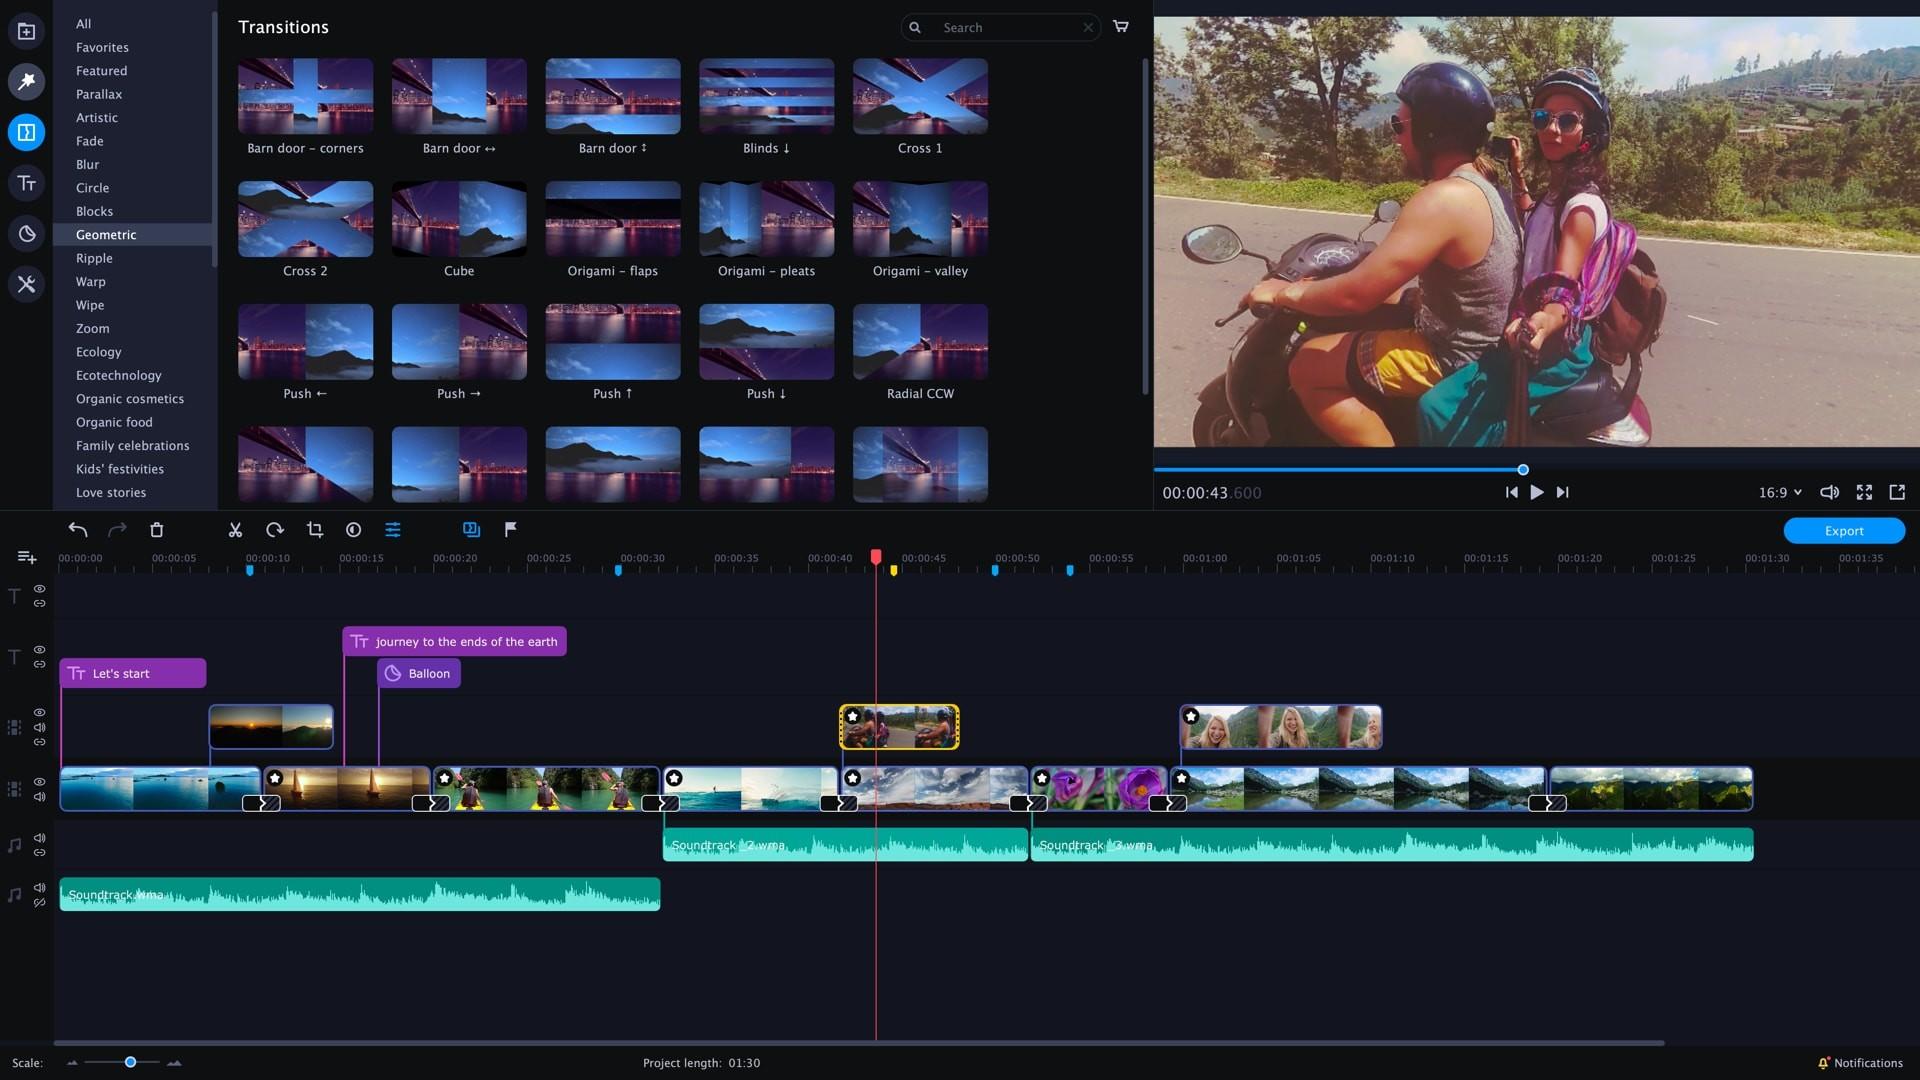 Screenshot №3 from game Movavi Video Editor Plus 2020 - Video Editing Software